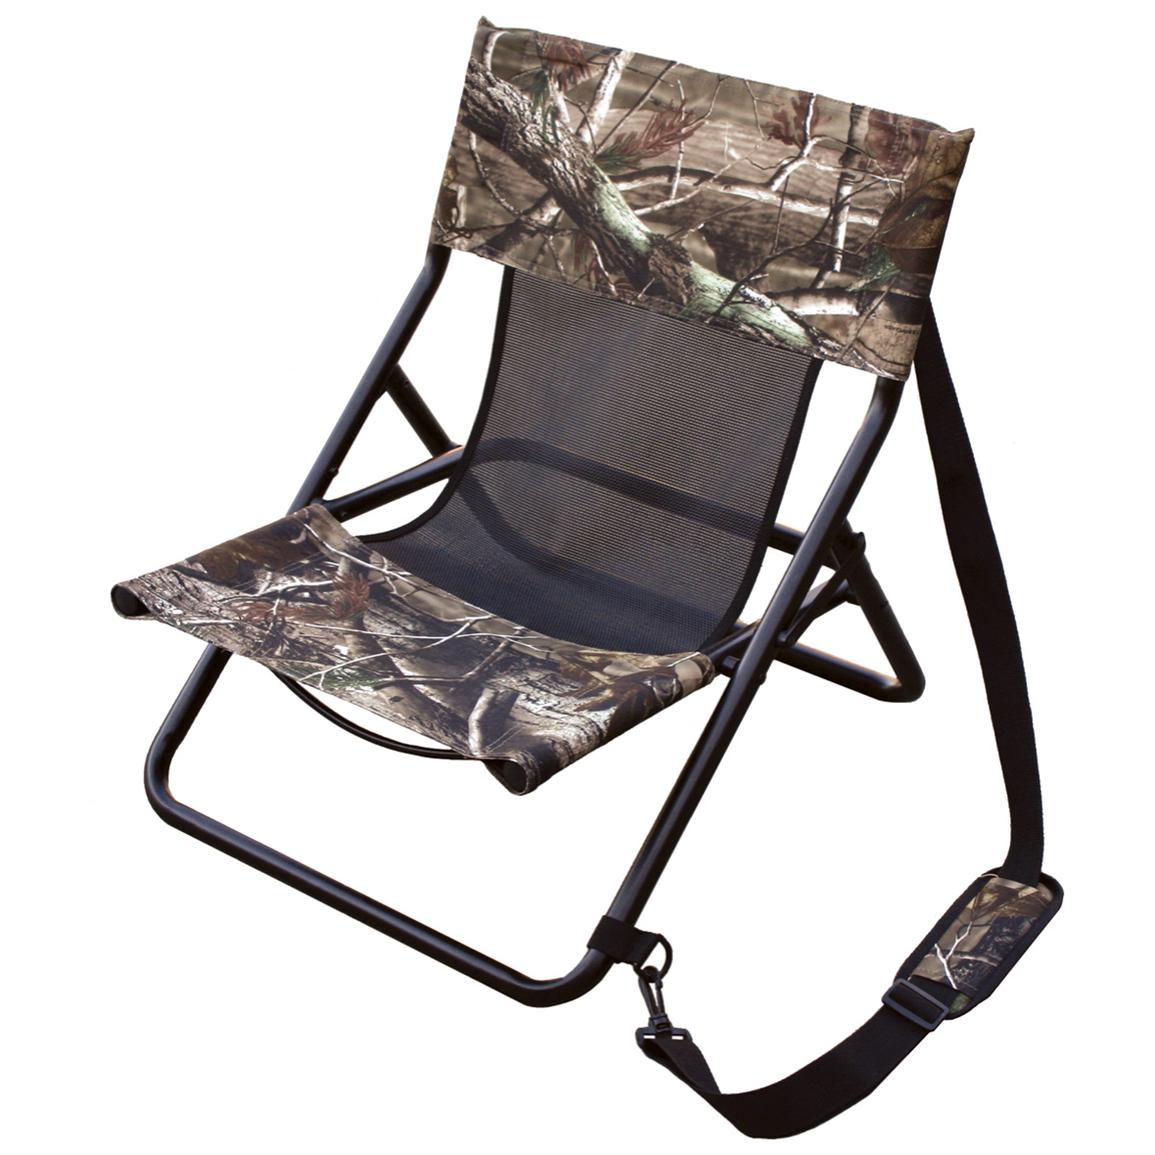 Alps Mountaineering® Turkey Chair 138868, Stools, Chairs